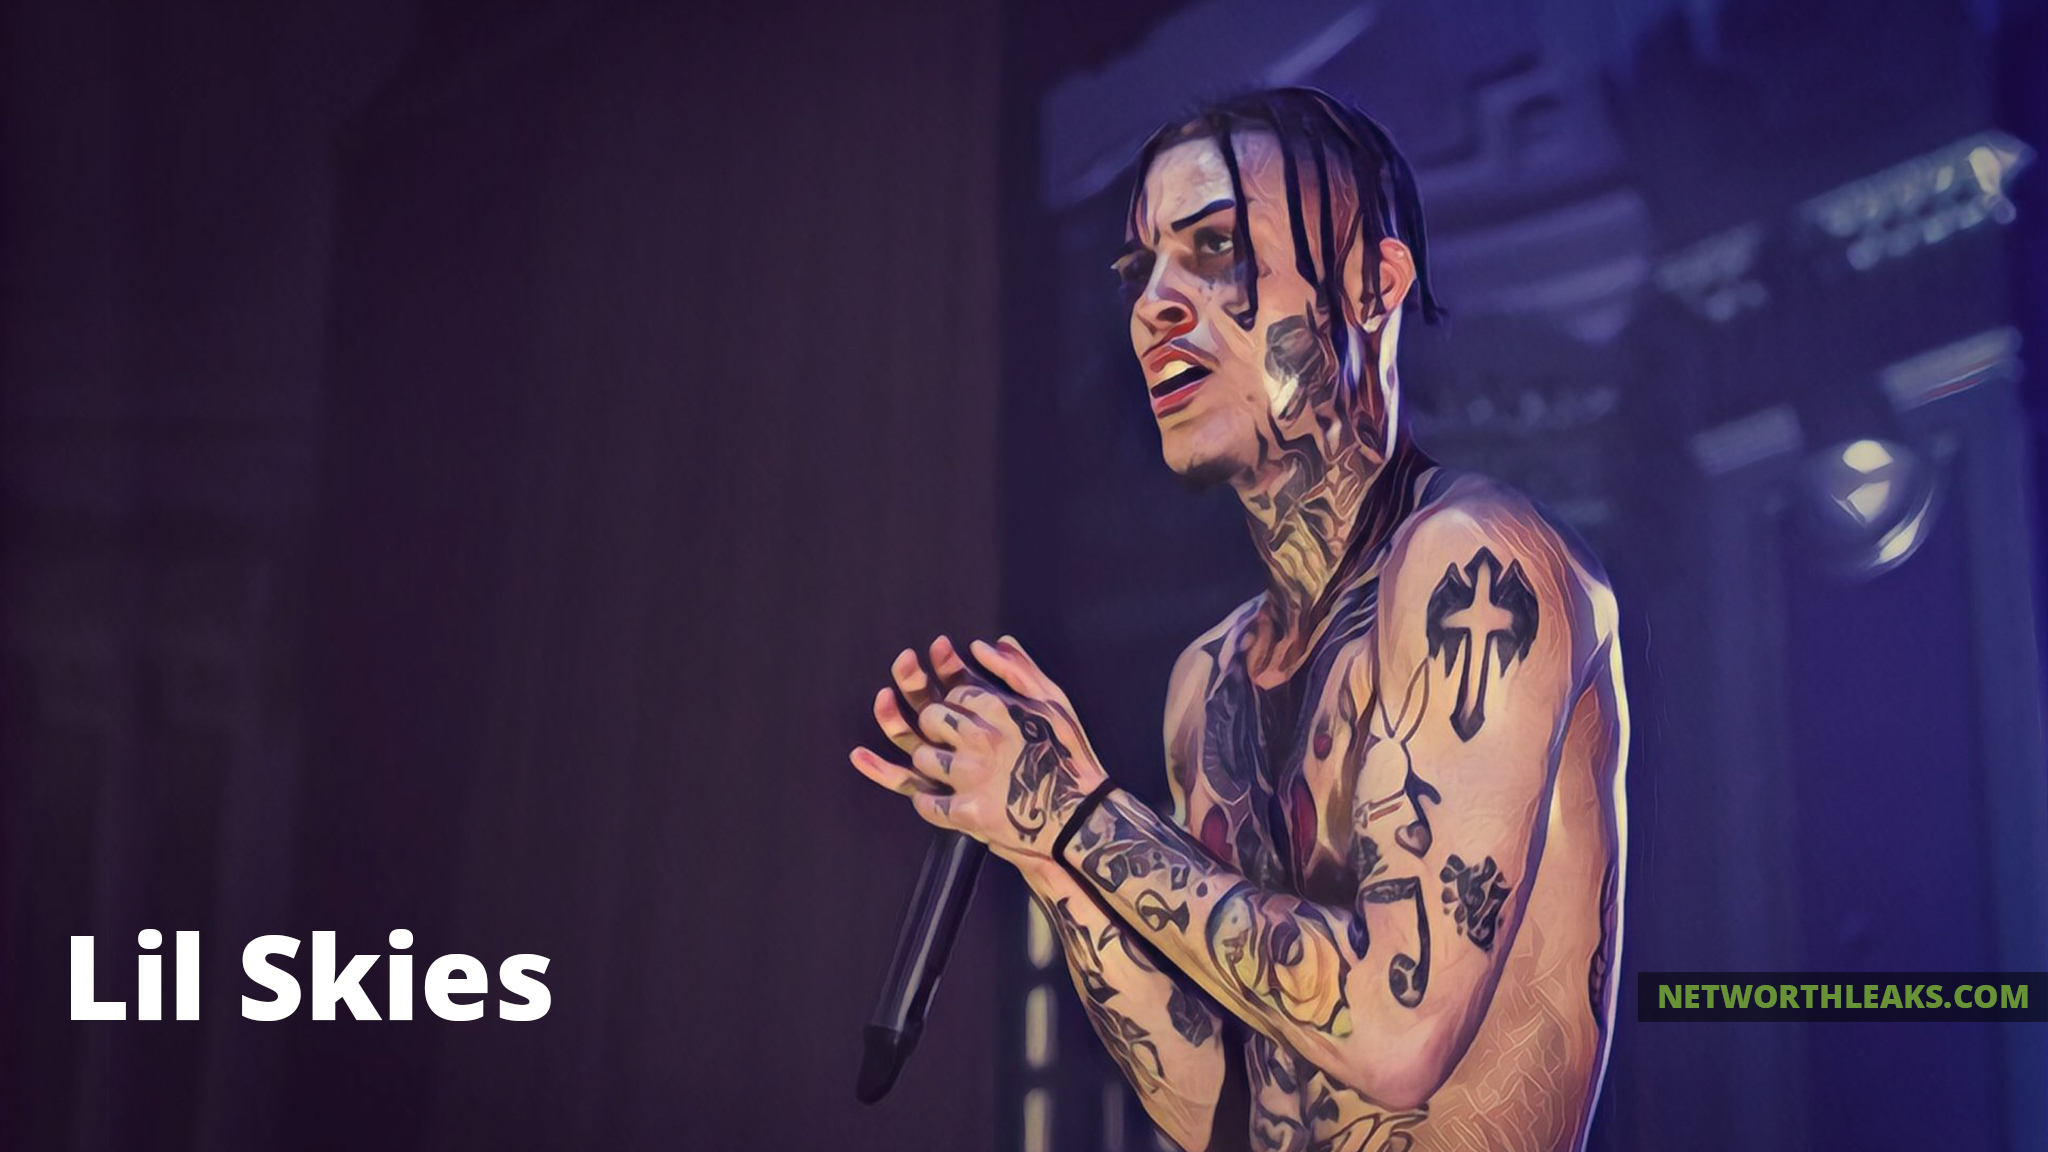 Lil Skies Wallpaper For Desktop And Mobile In HD Resolution